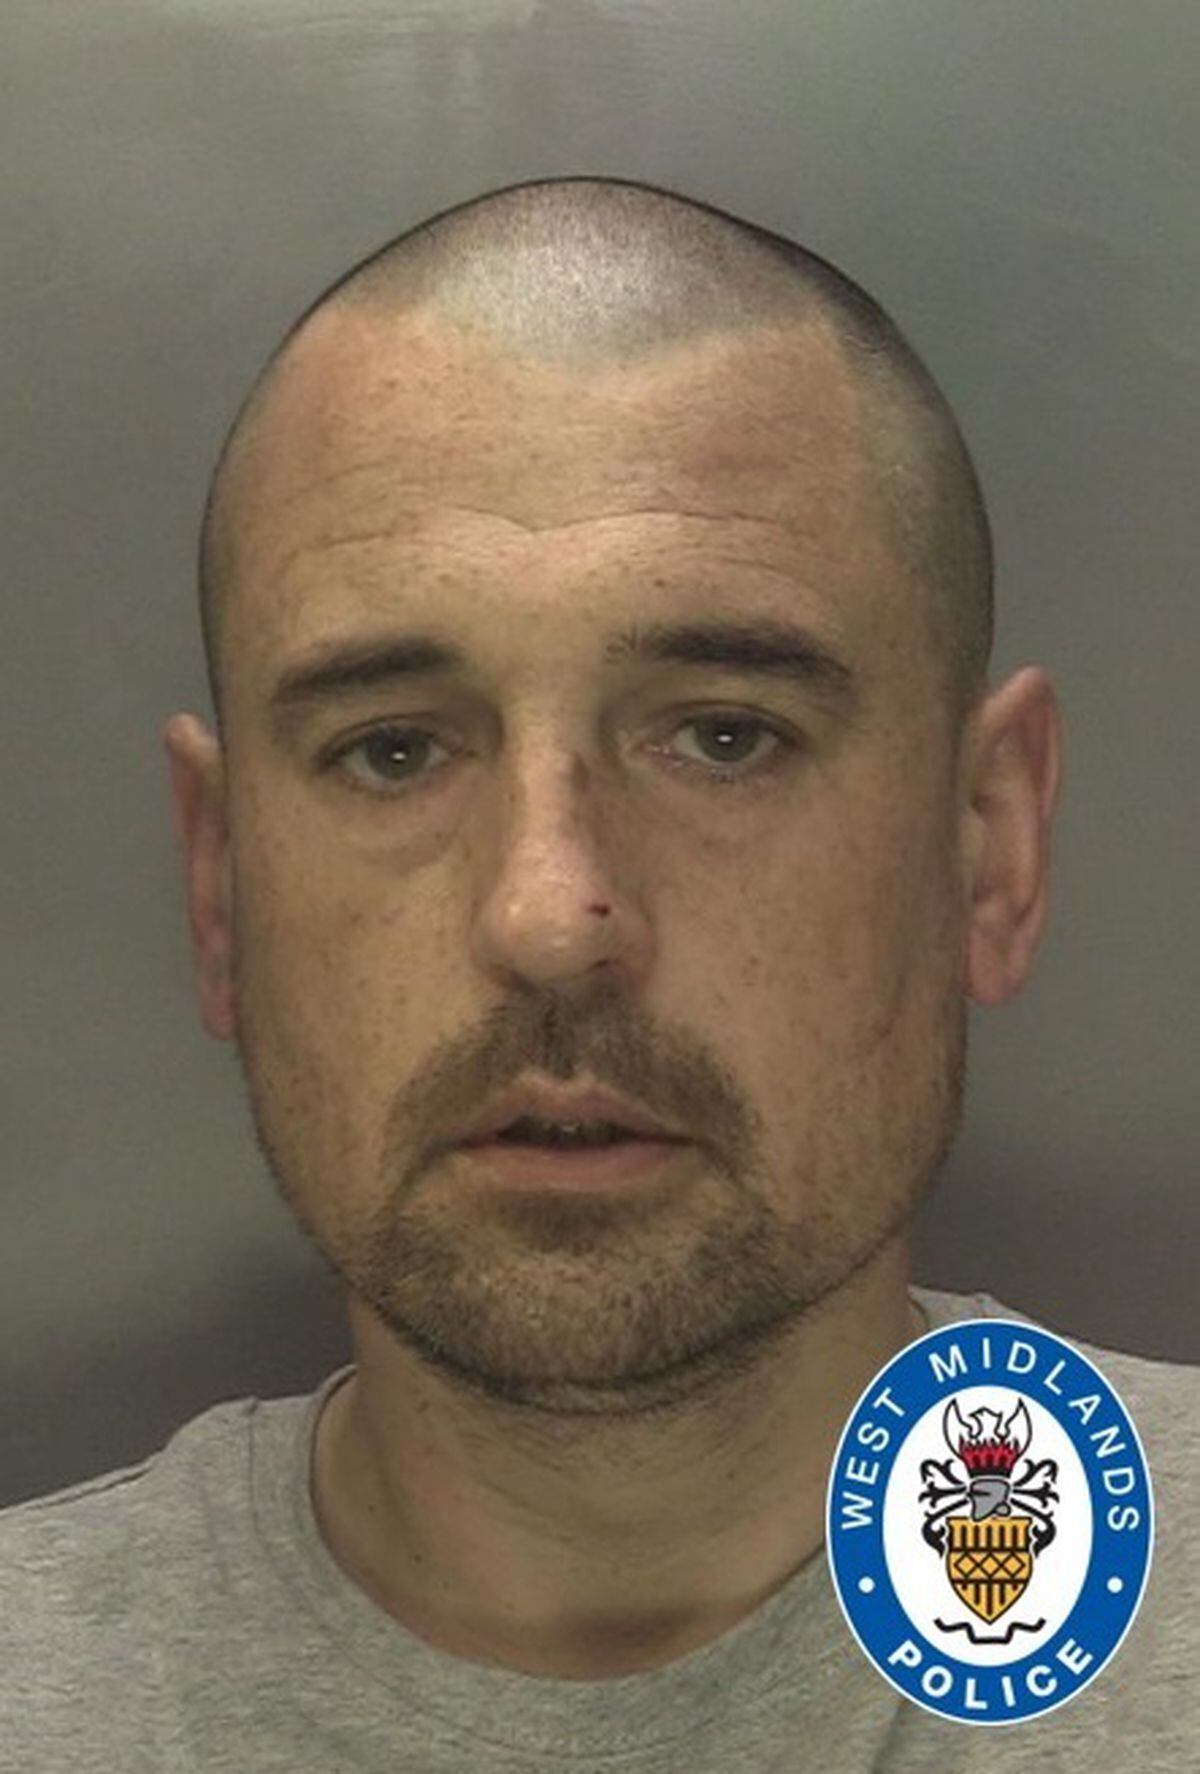 Nicholas Stallard has been sentenced to 13 years for manslaughter.